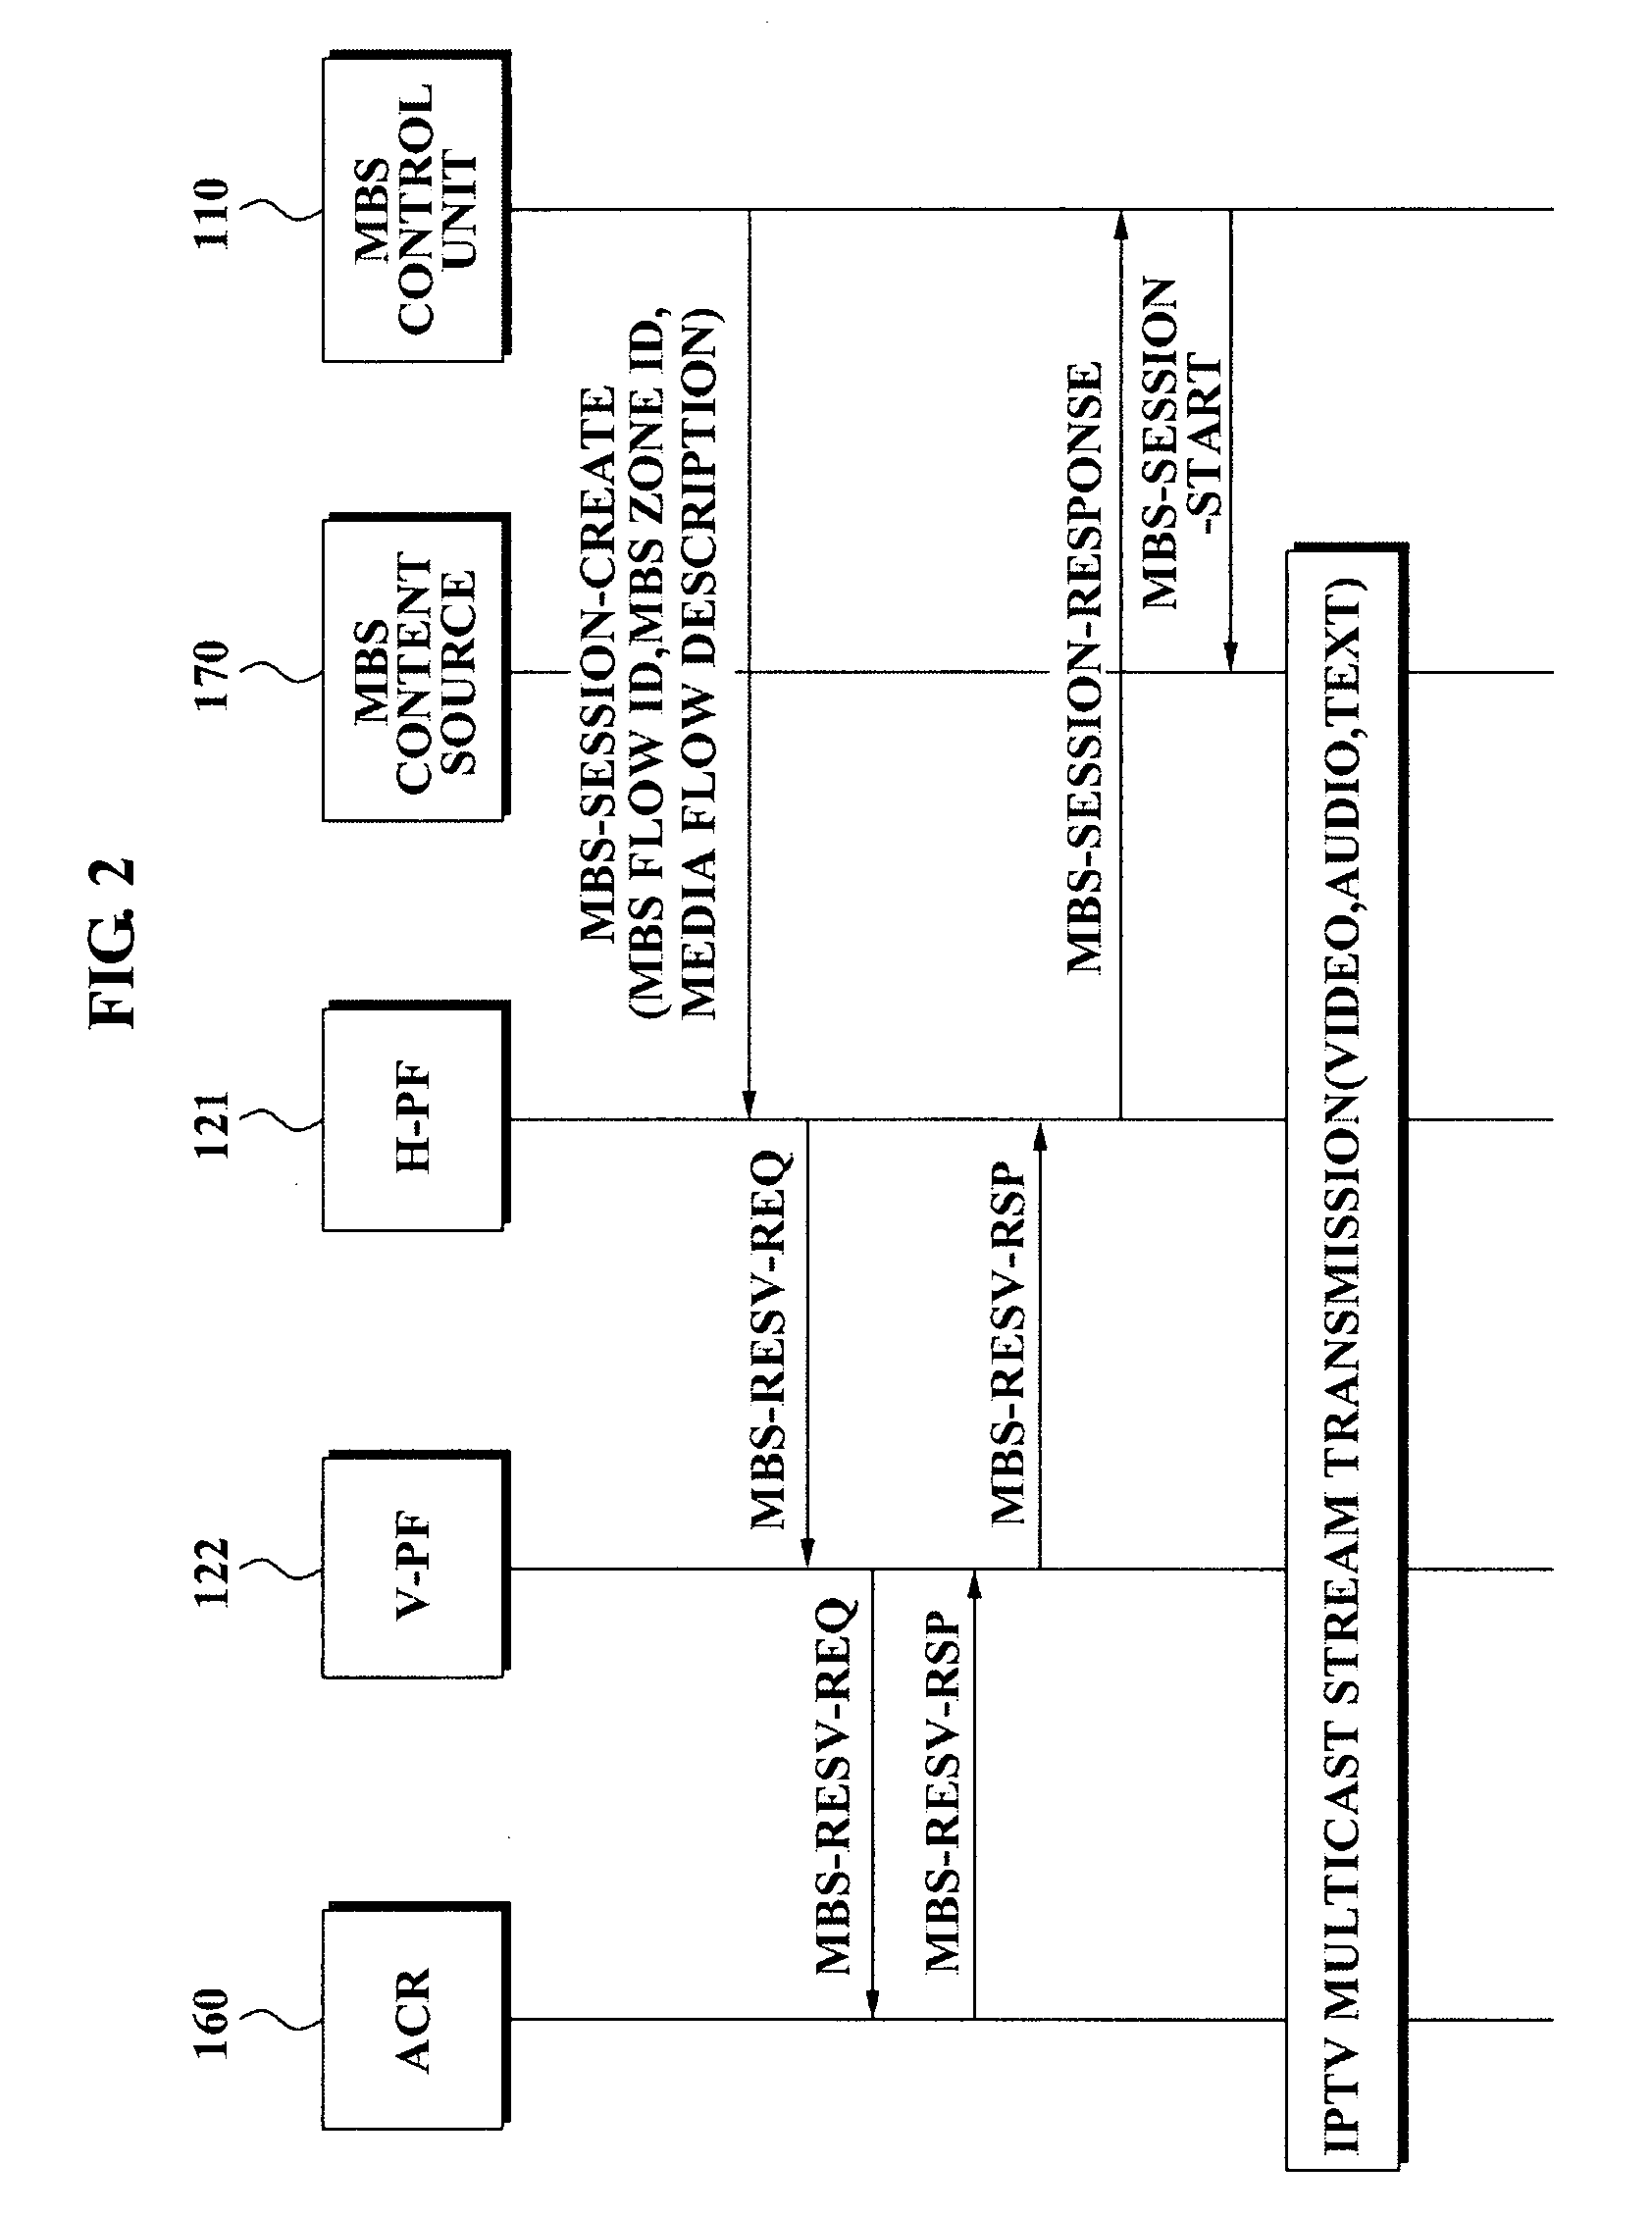 Method of providing multicast/broadcast service using wibro/wimax network and system using the method